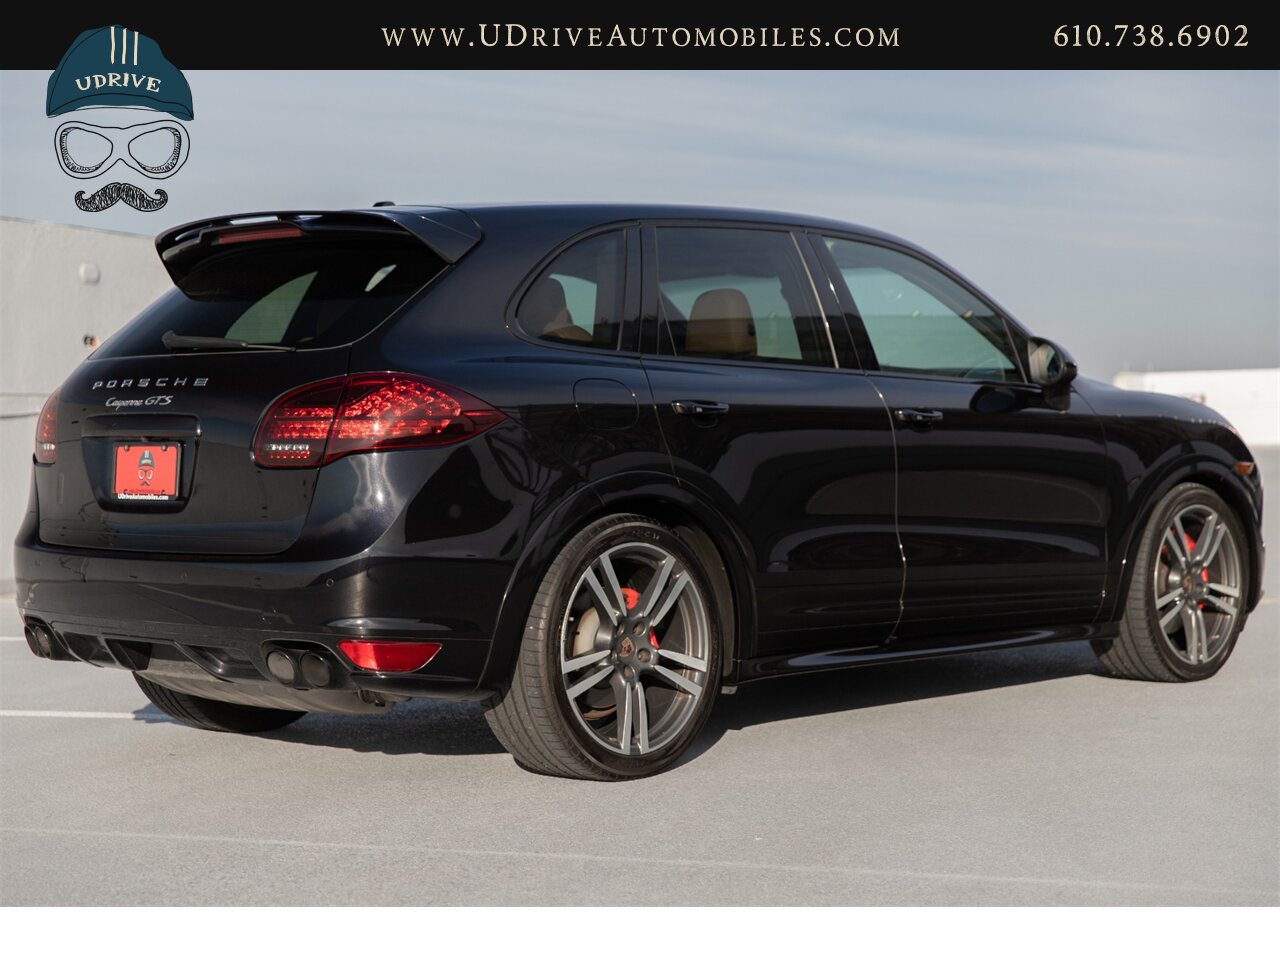 2013 Porsche Cayenne GTS Service History 1 Owner 21in Wheels  Espresso / Cognac Two Tone Leather - Photo 3 - West Chester, PA 19382